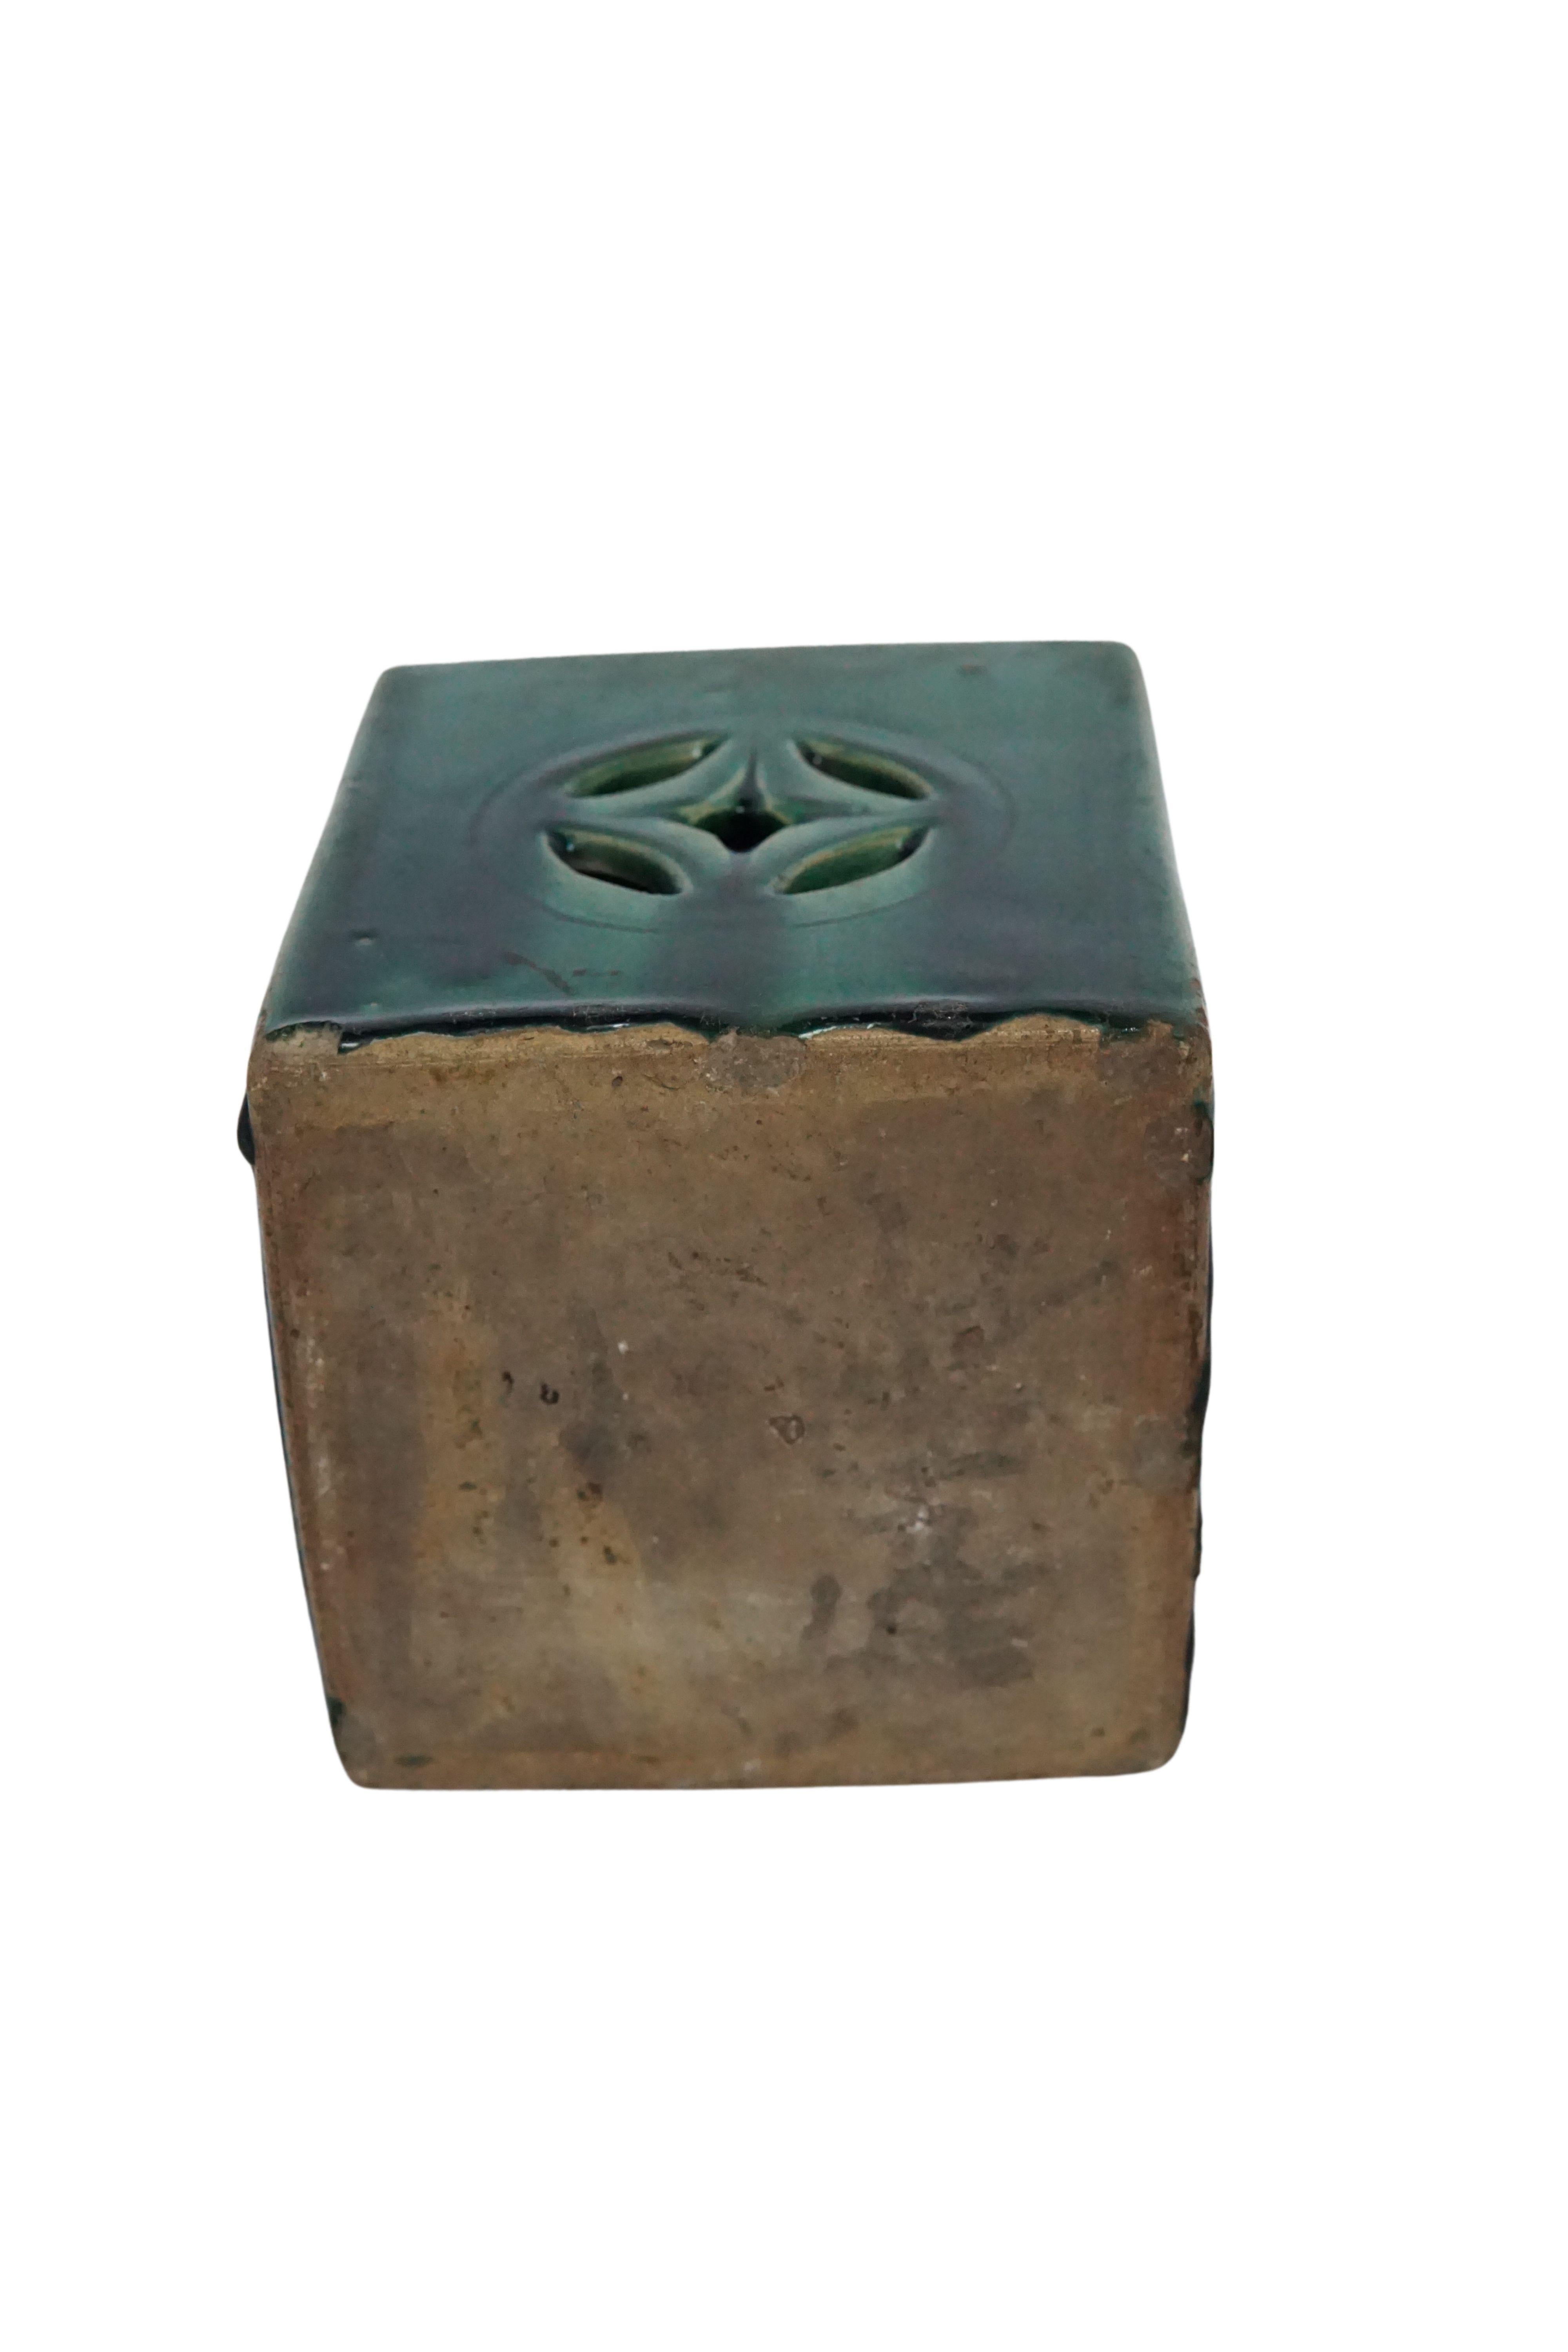 Glazed Antique Chinese Ceramic Headrest 'Opium Pillow' with Coin Symbol, c. 1900 For Sale